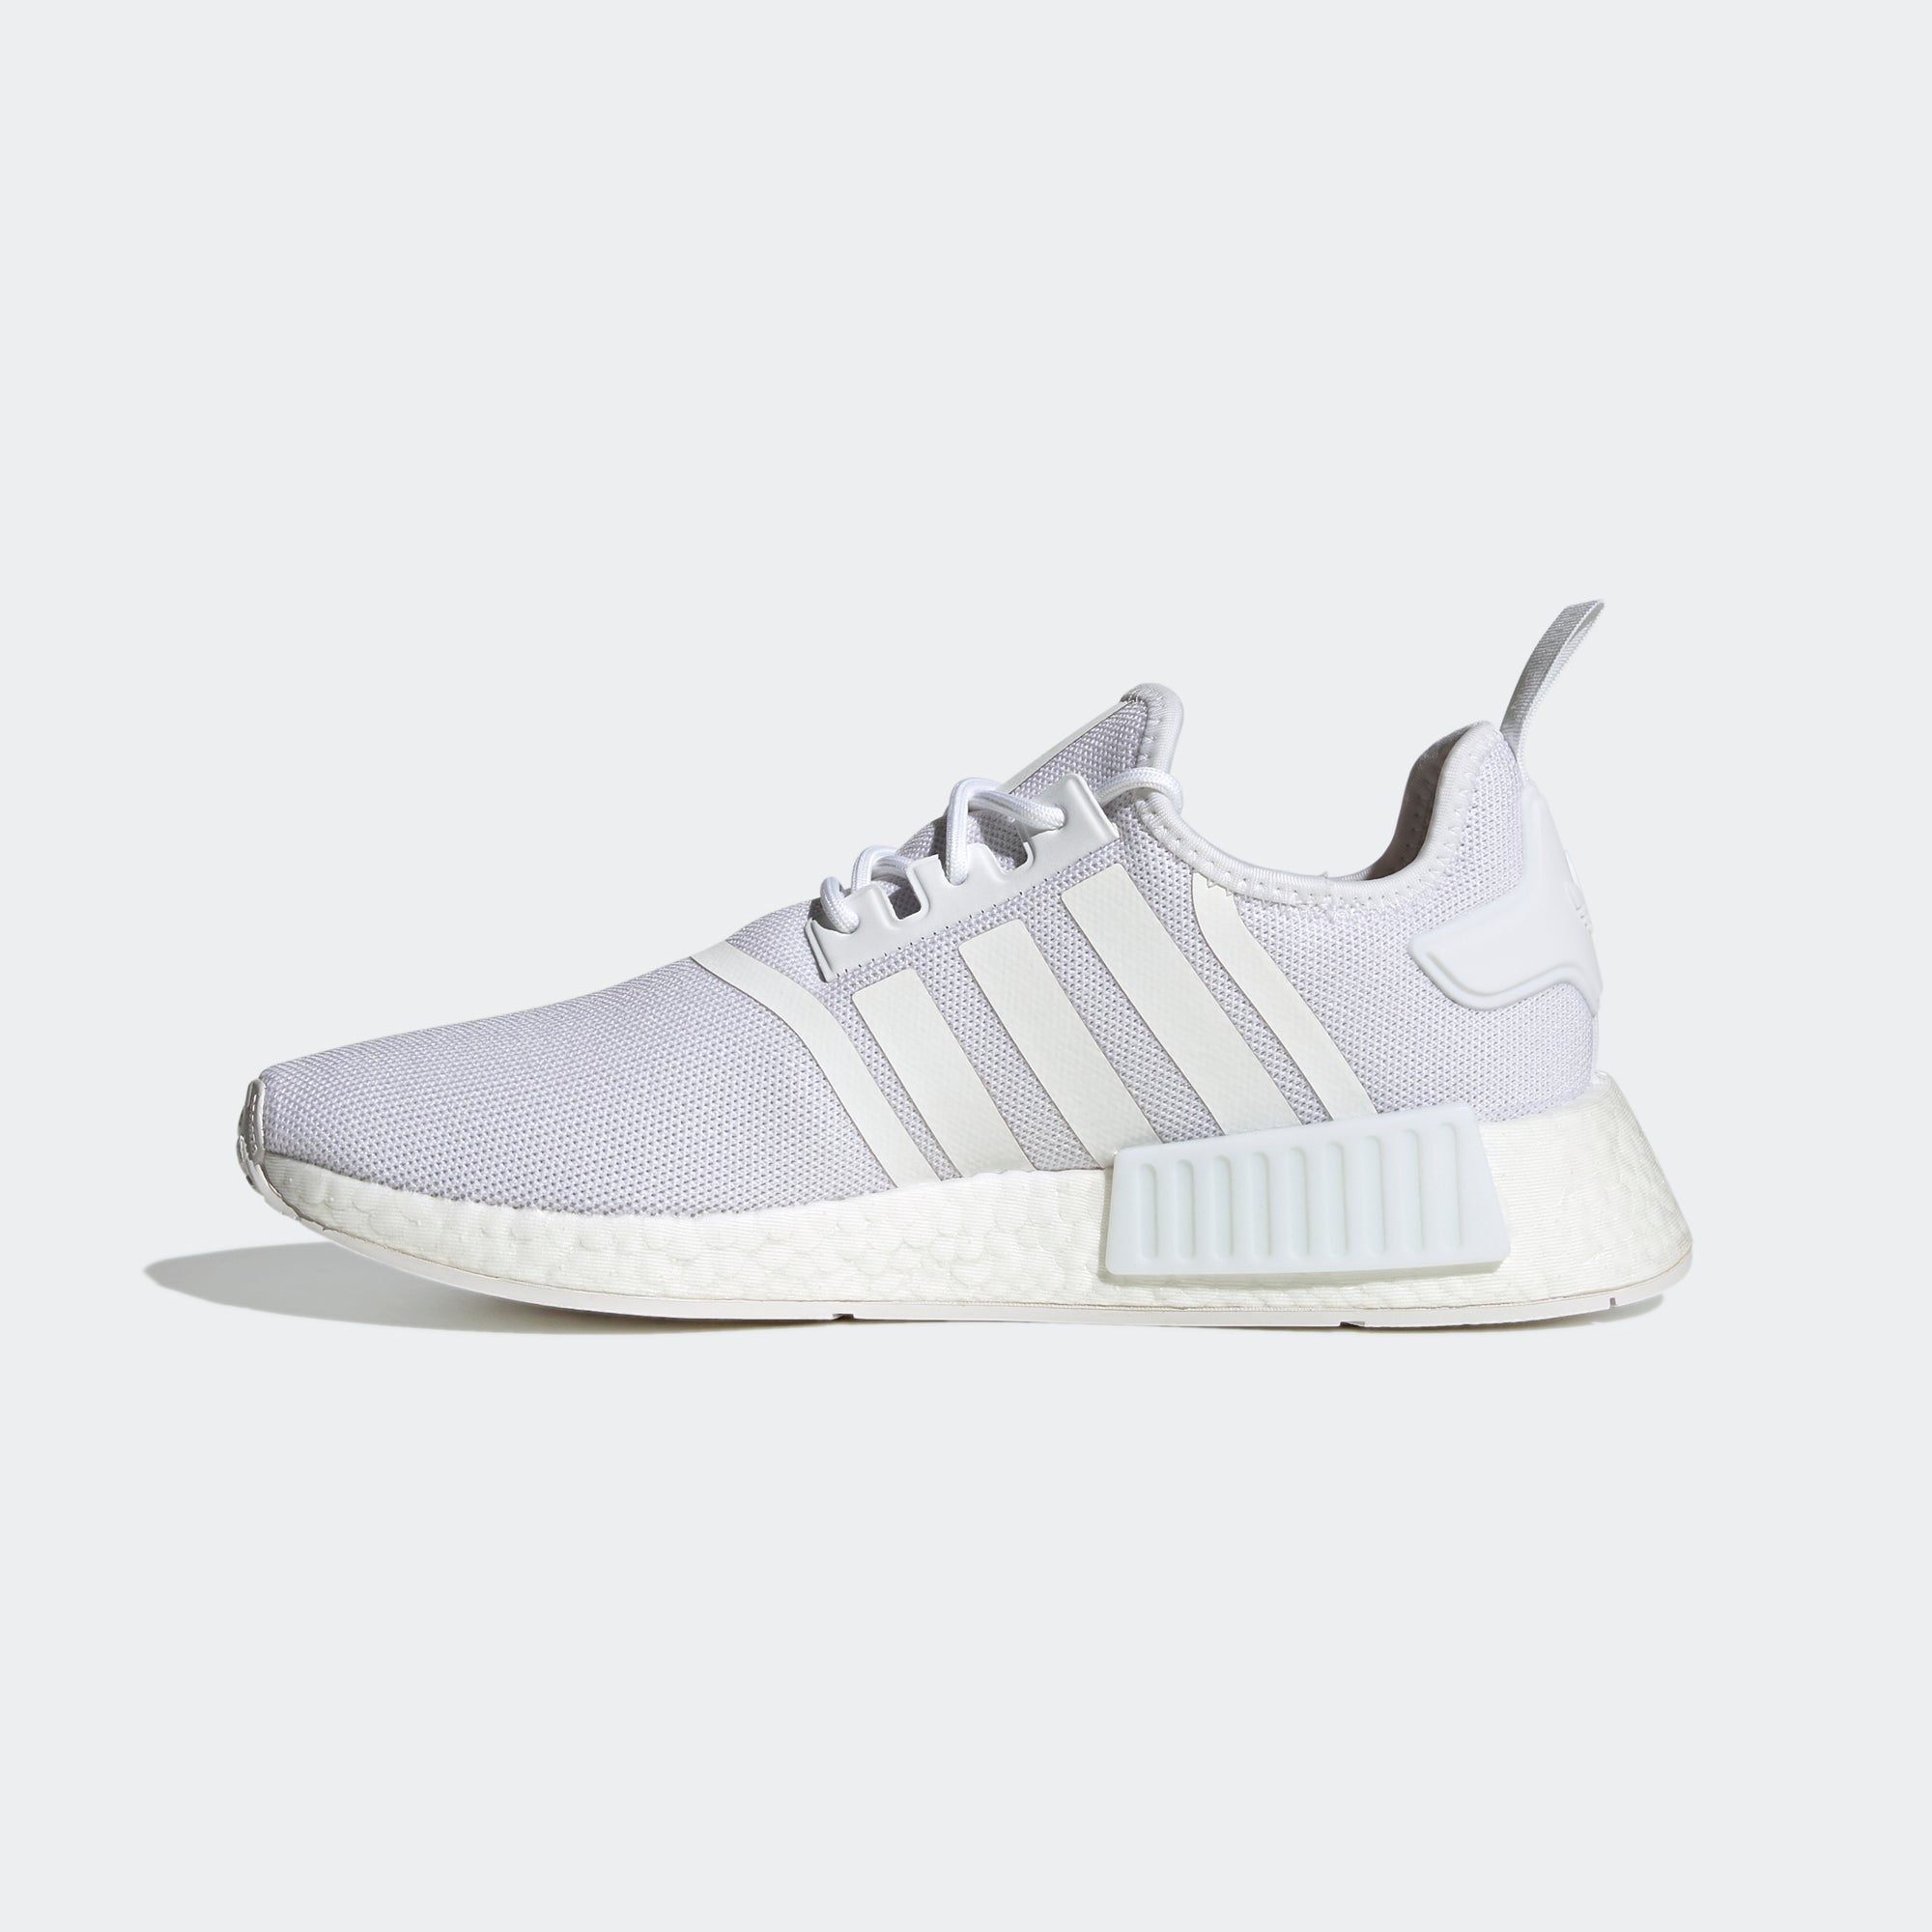 Men's adidas NMD_R1 Primeblue Shoes White GZ9259 | Chicago City Sports